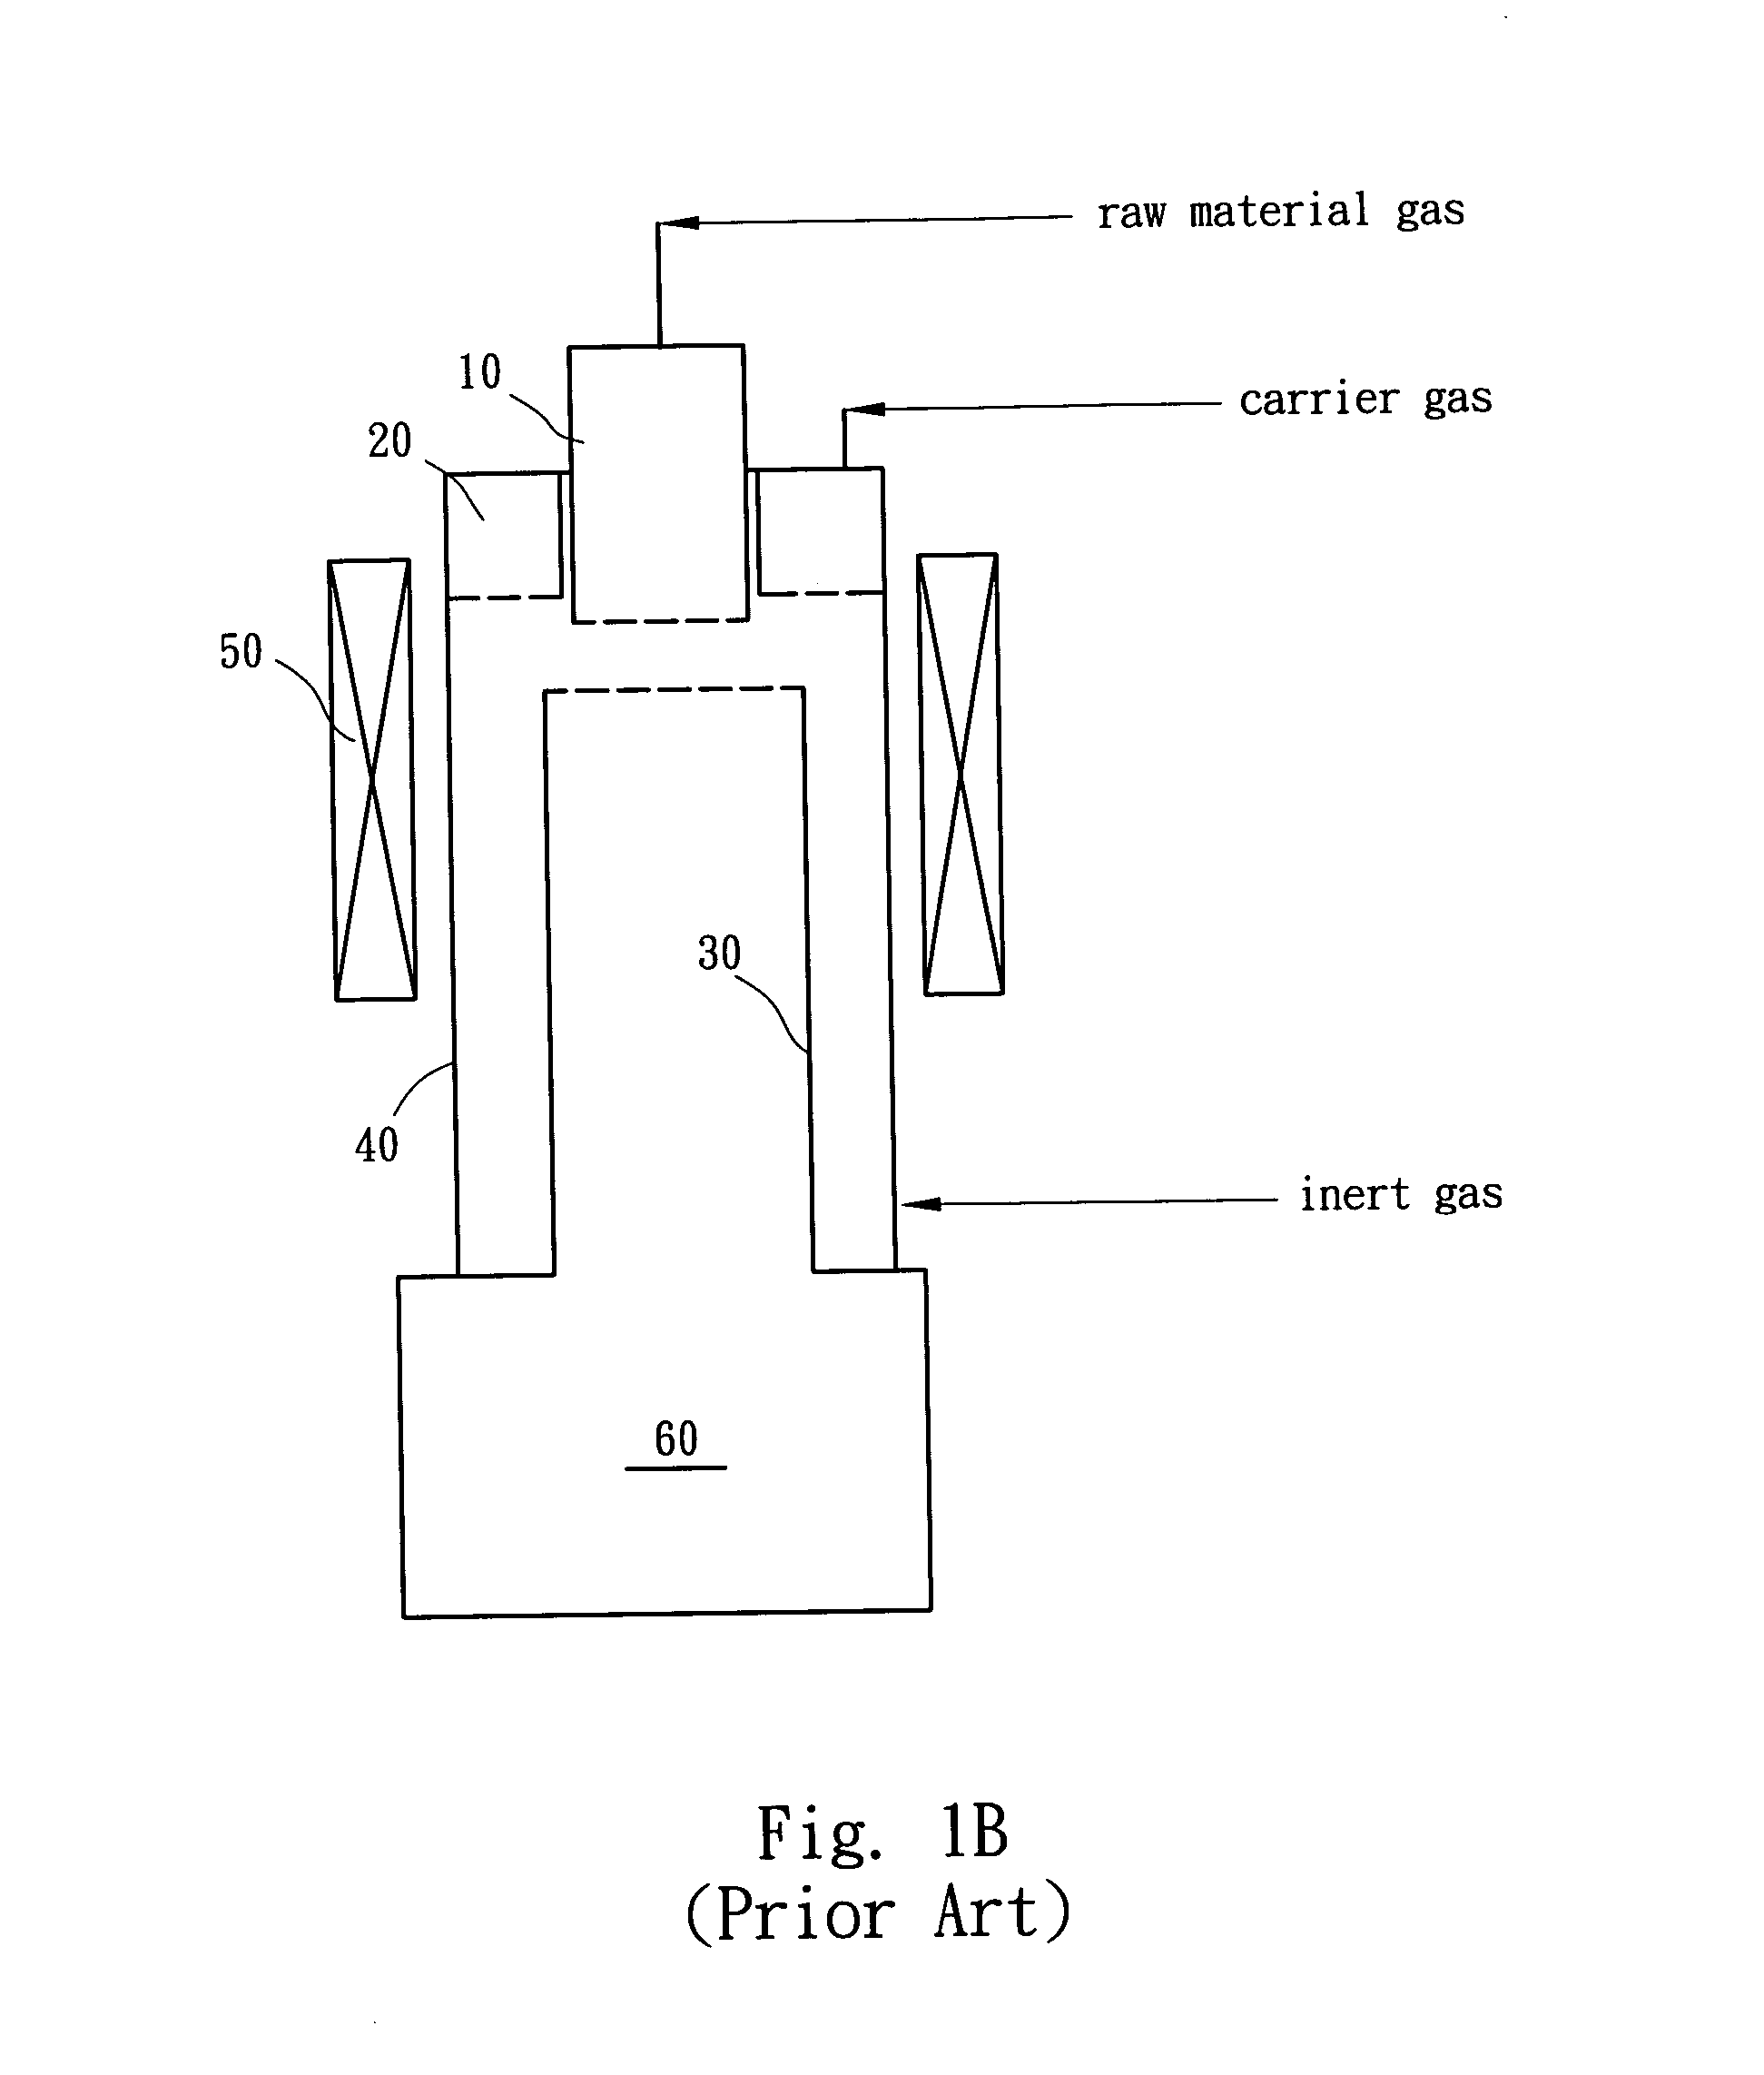 Reaction apparatus for producing vapor-grown carbon fibers and continuous production system therefor